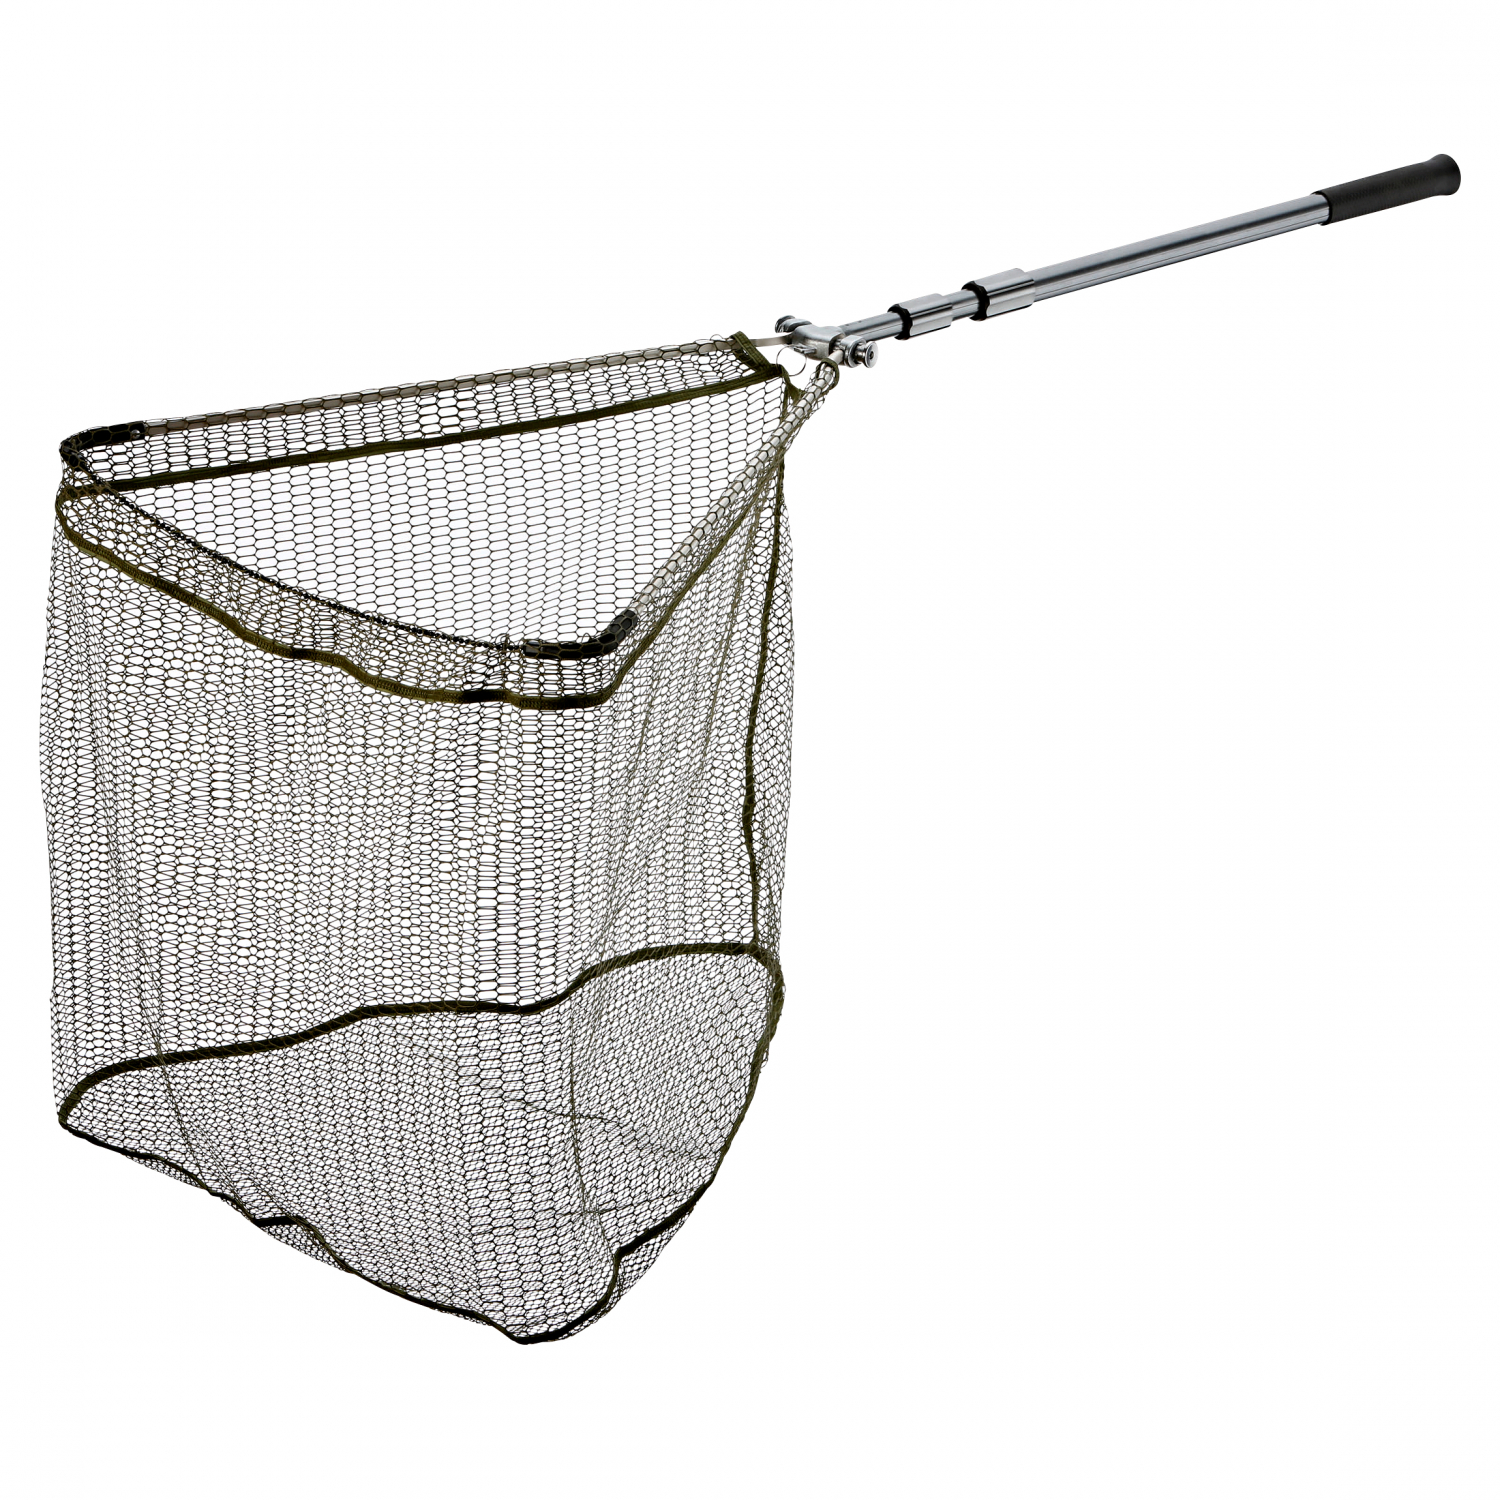 Cormoran Foldable Landing Net K-DON Ultra Strong Model 6247 at low prices